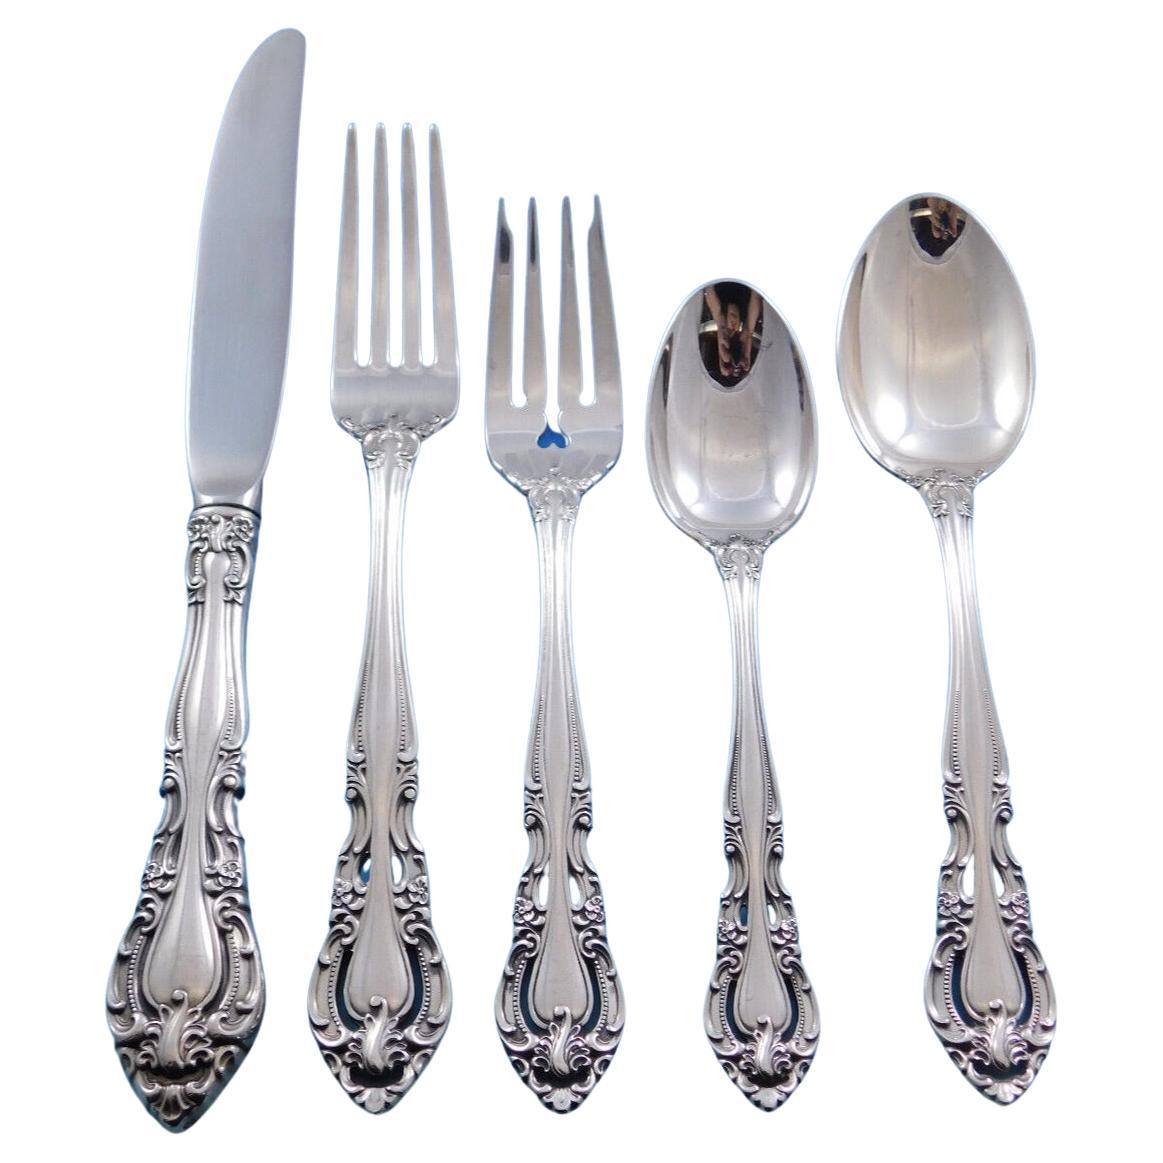 Baronial by Gorham Sterling Silver Flatware Set of 8 Service 40 Pcs Place